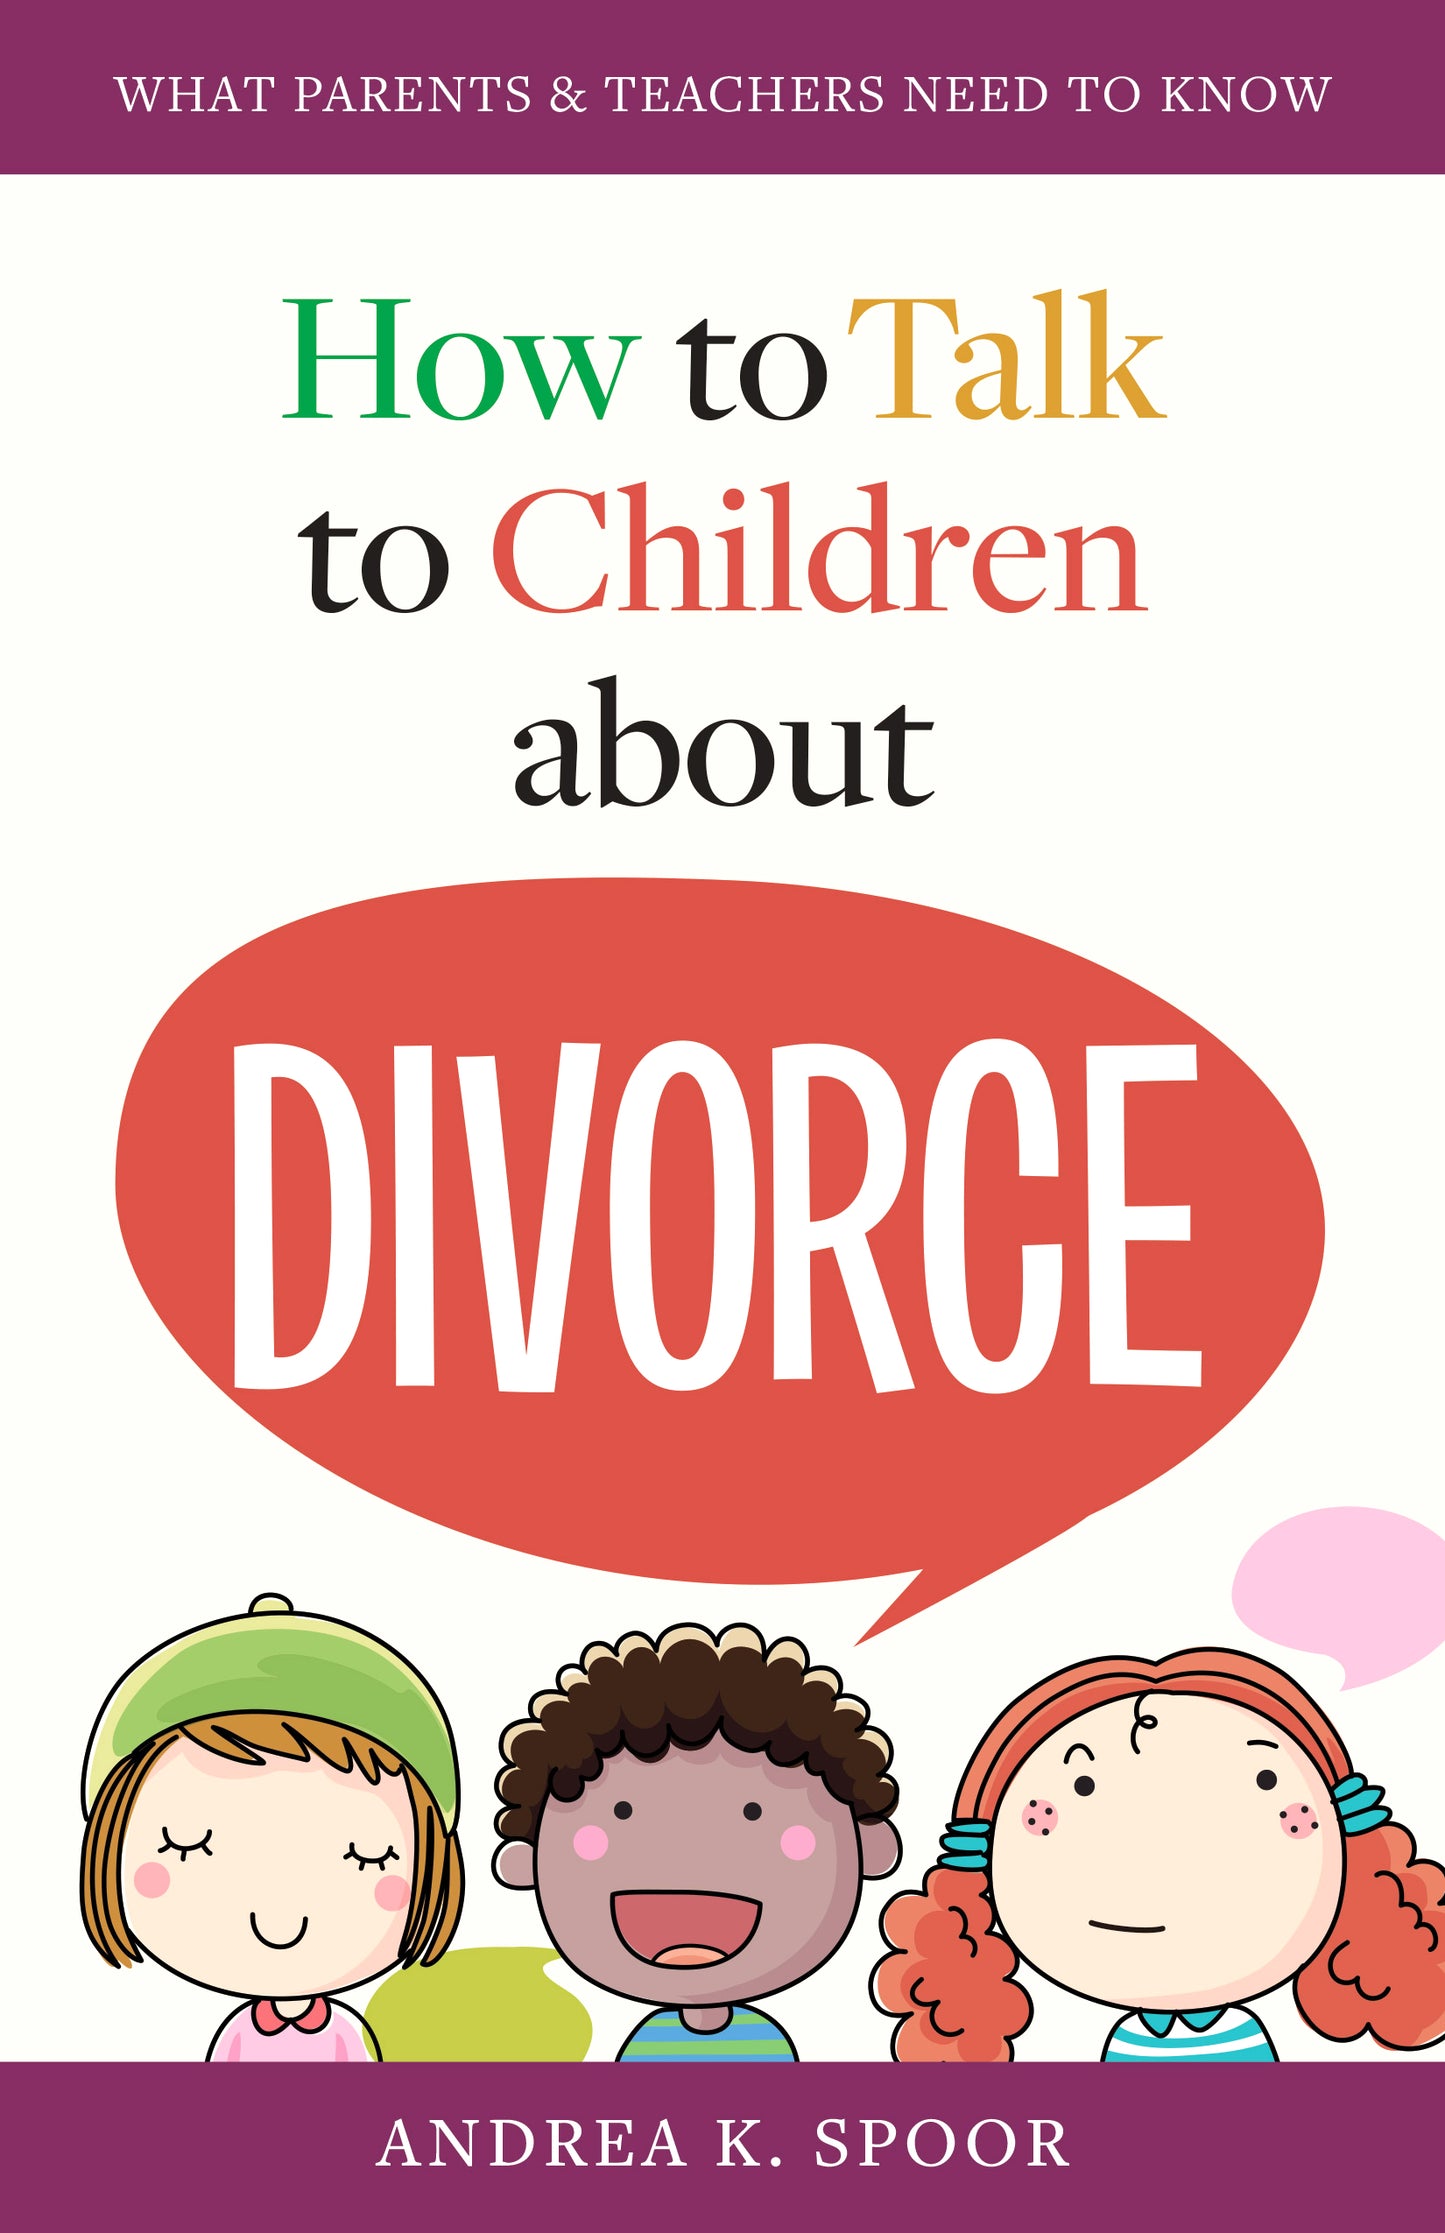 How to Talk to Children about Divorce